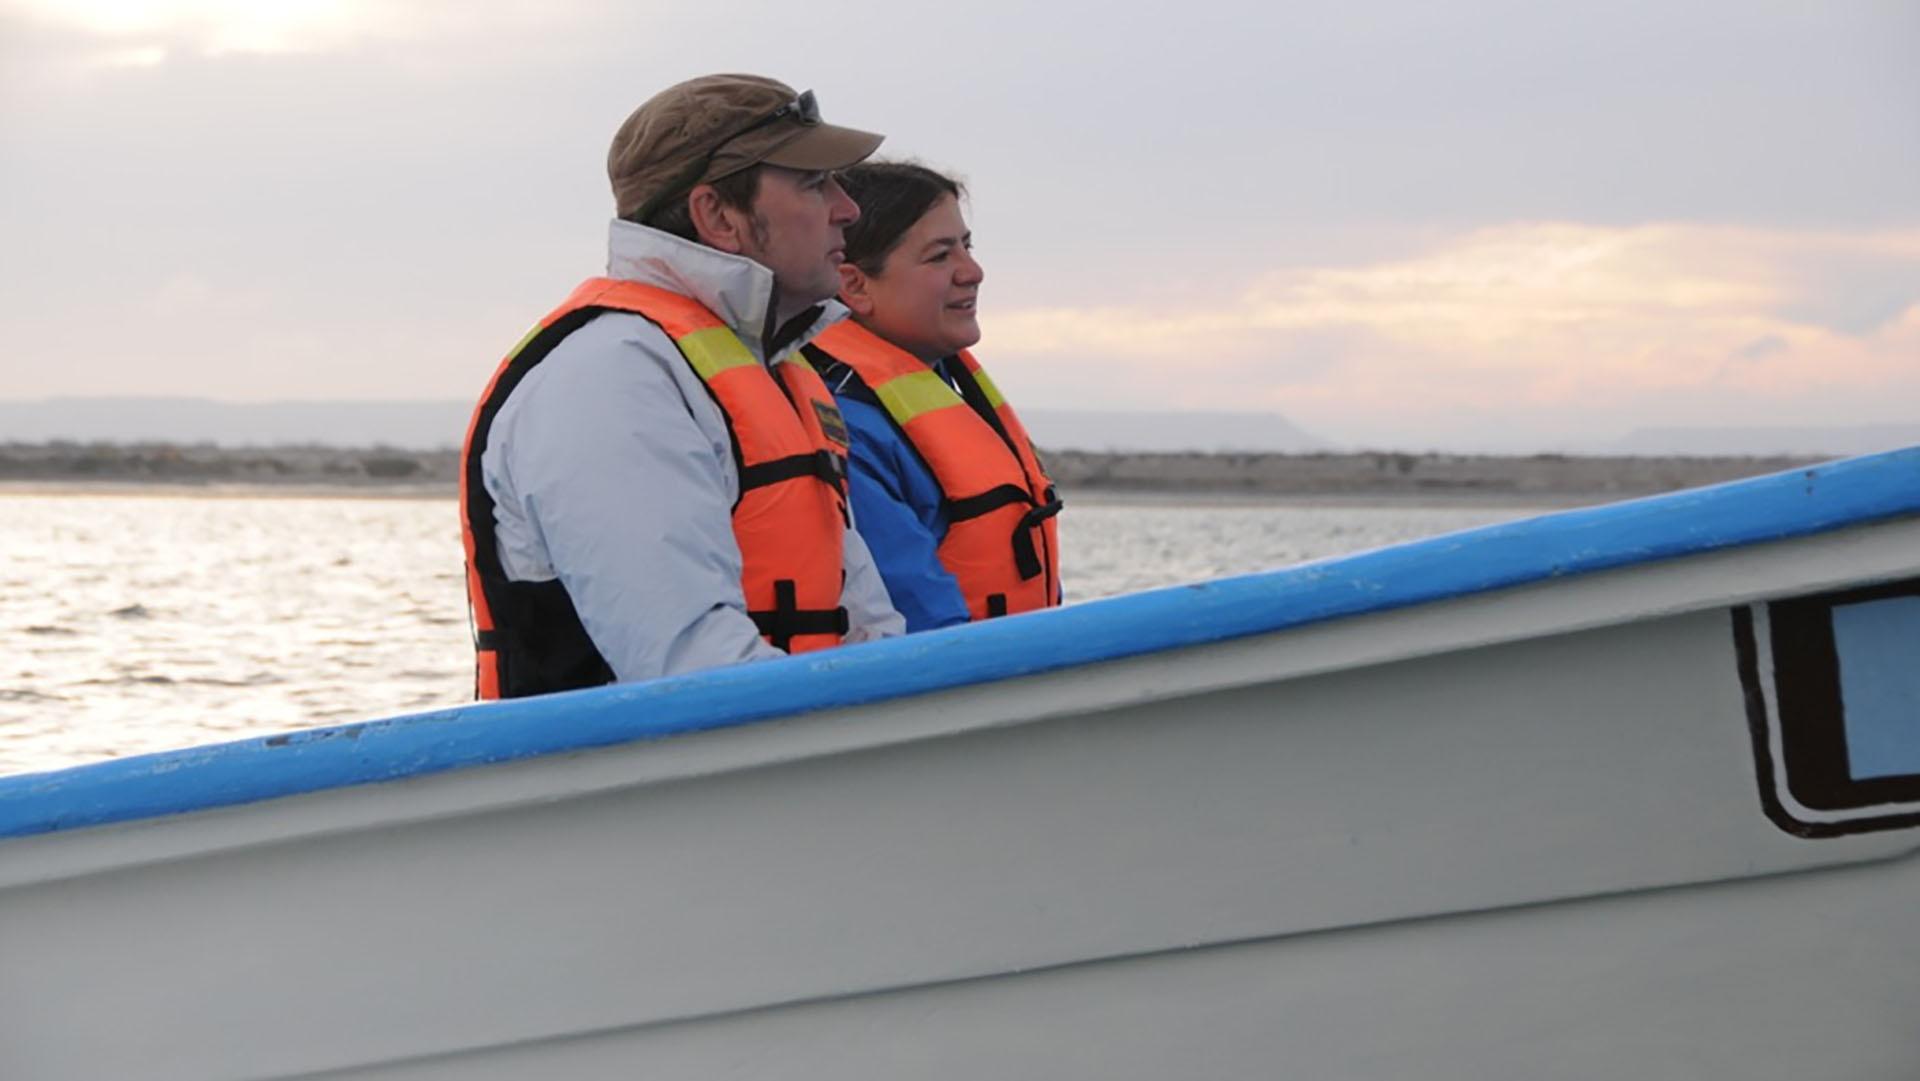 Image of man and woman on boat